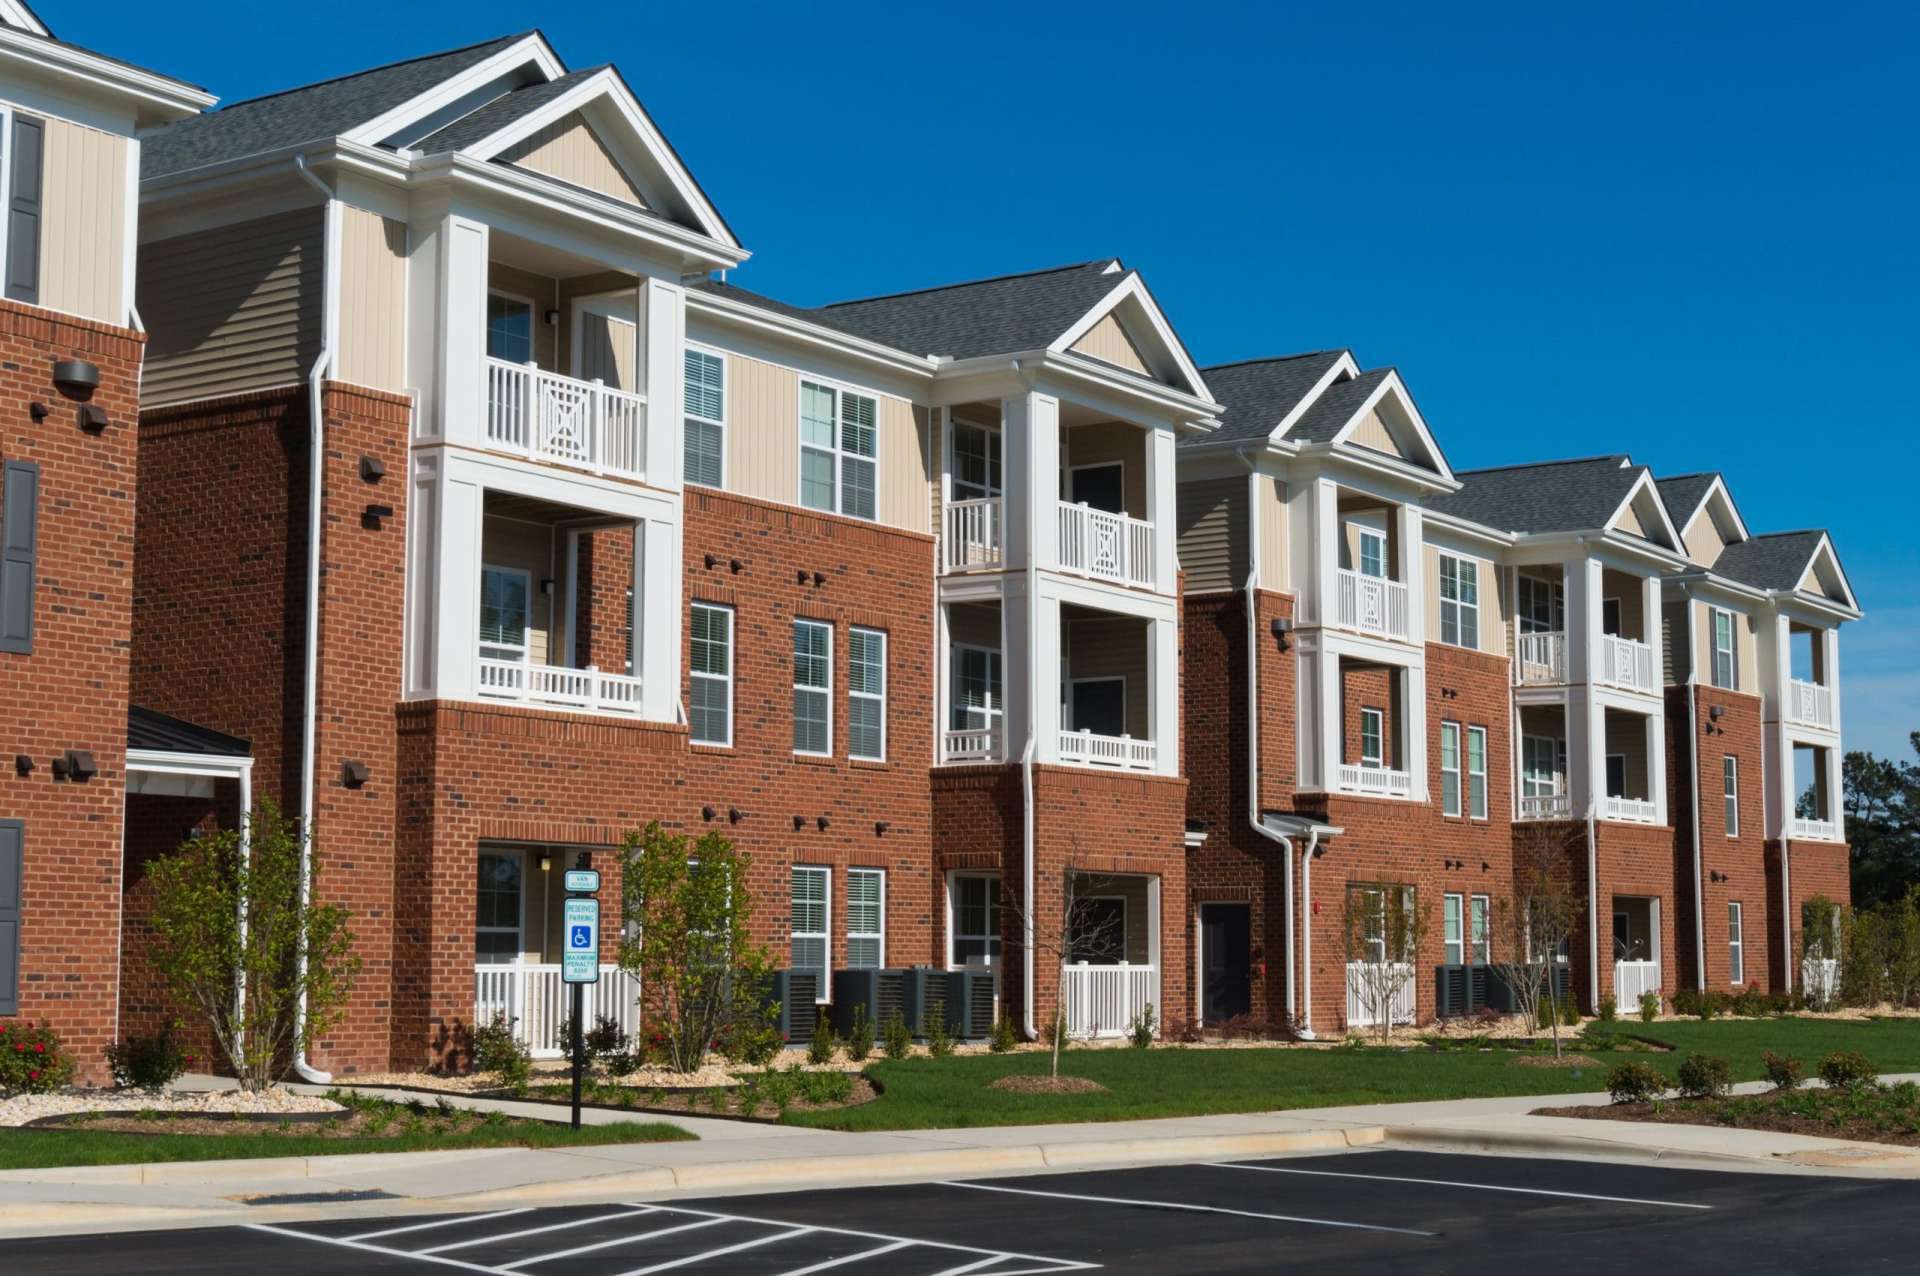 Apartment Complexes: The $300 Dilemma – Will They Deny You?